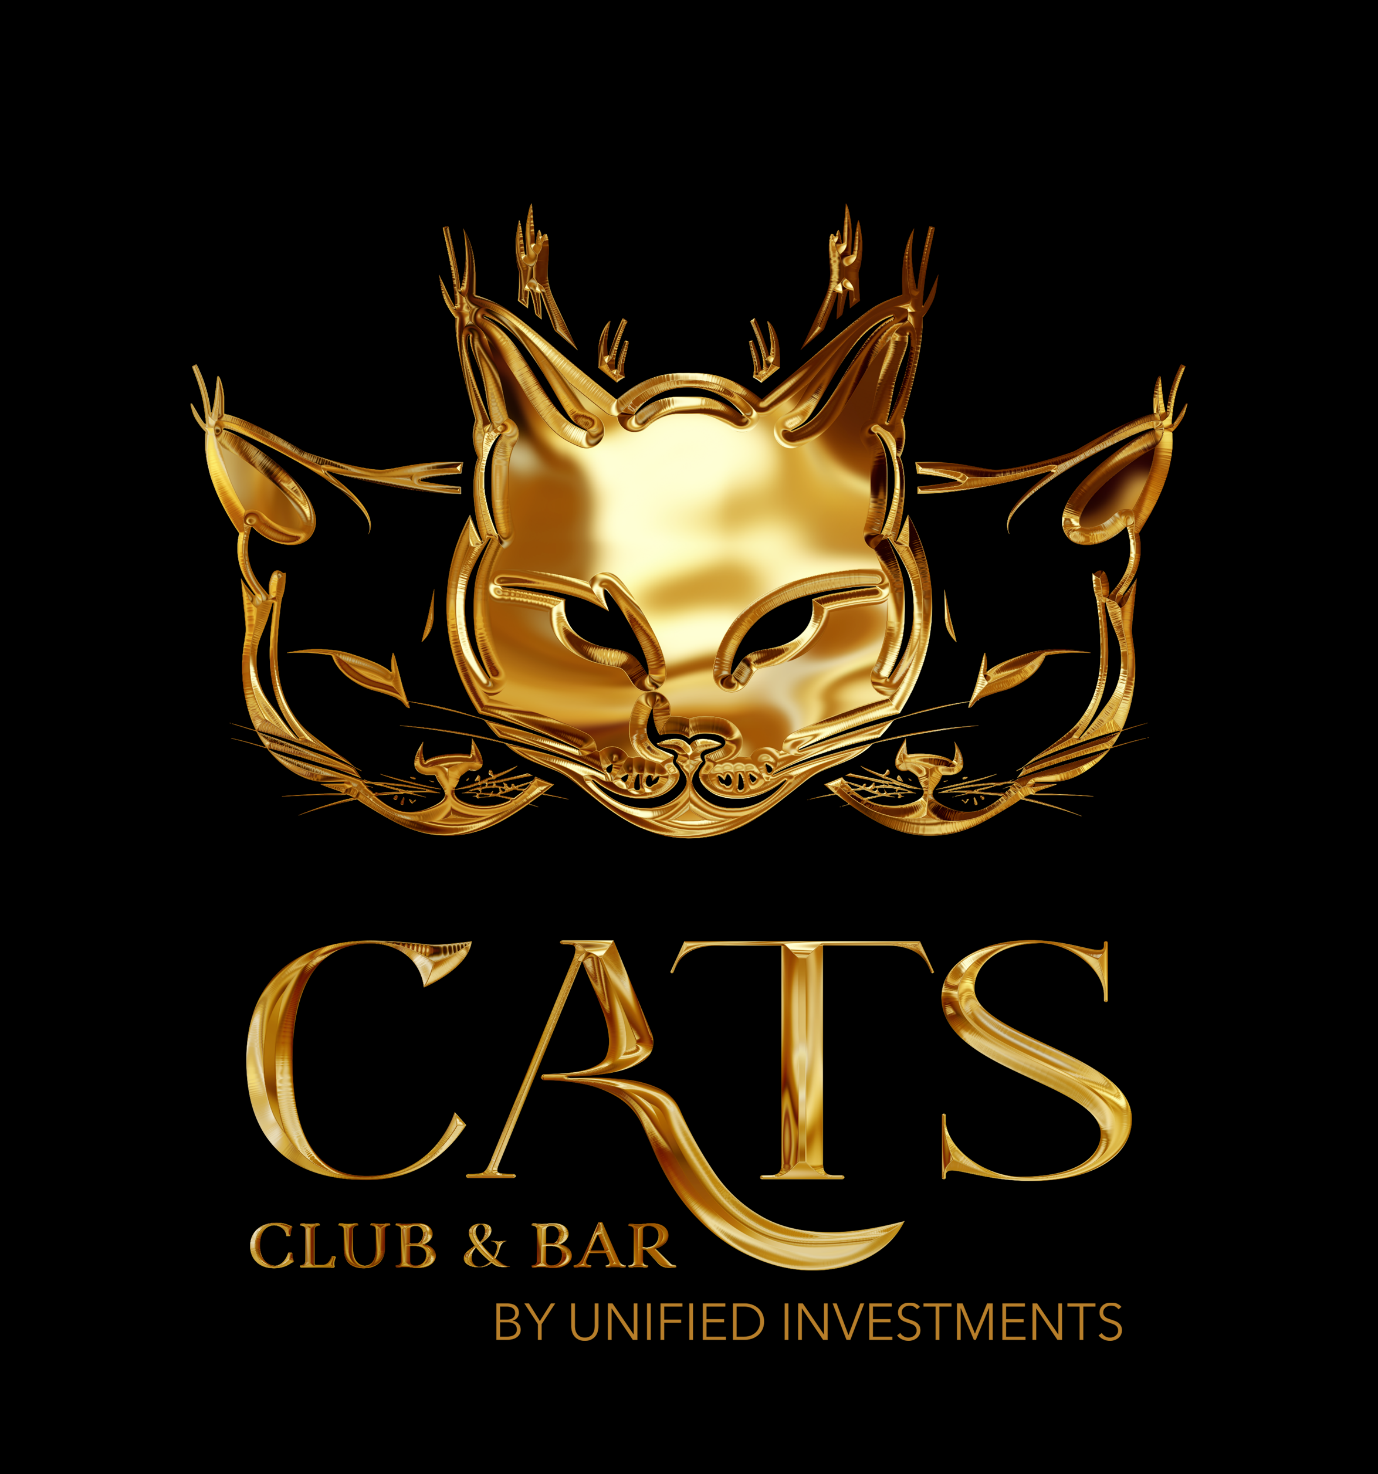 Unified Investments LLC, led by Subodh Bajpai, introduces CATS CLUB AND BAR, revolutionizing Dubai’s nightlife scene.